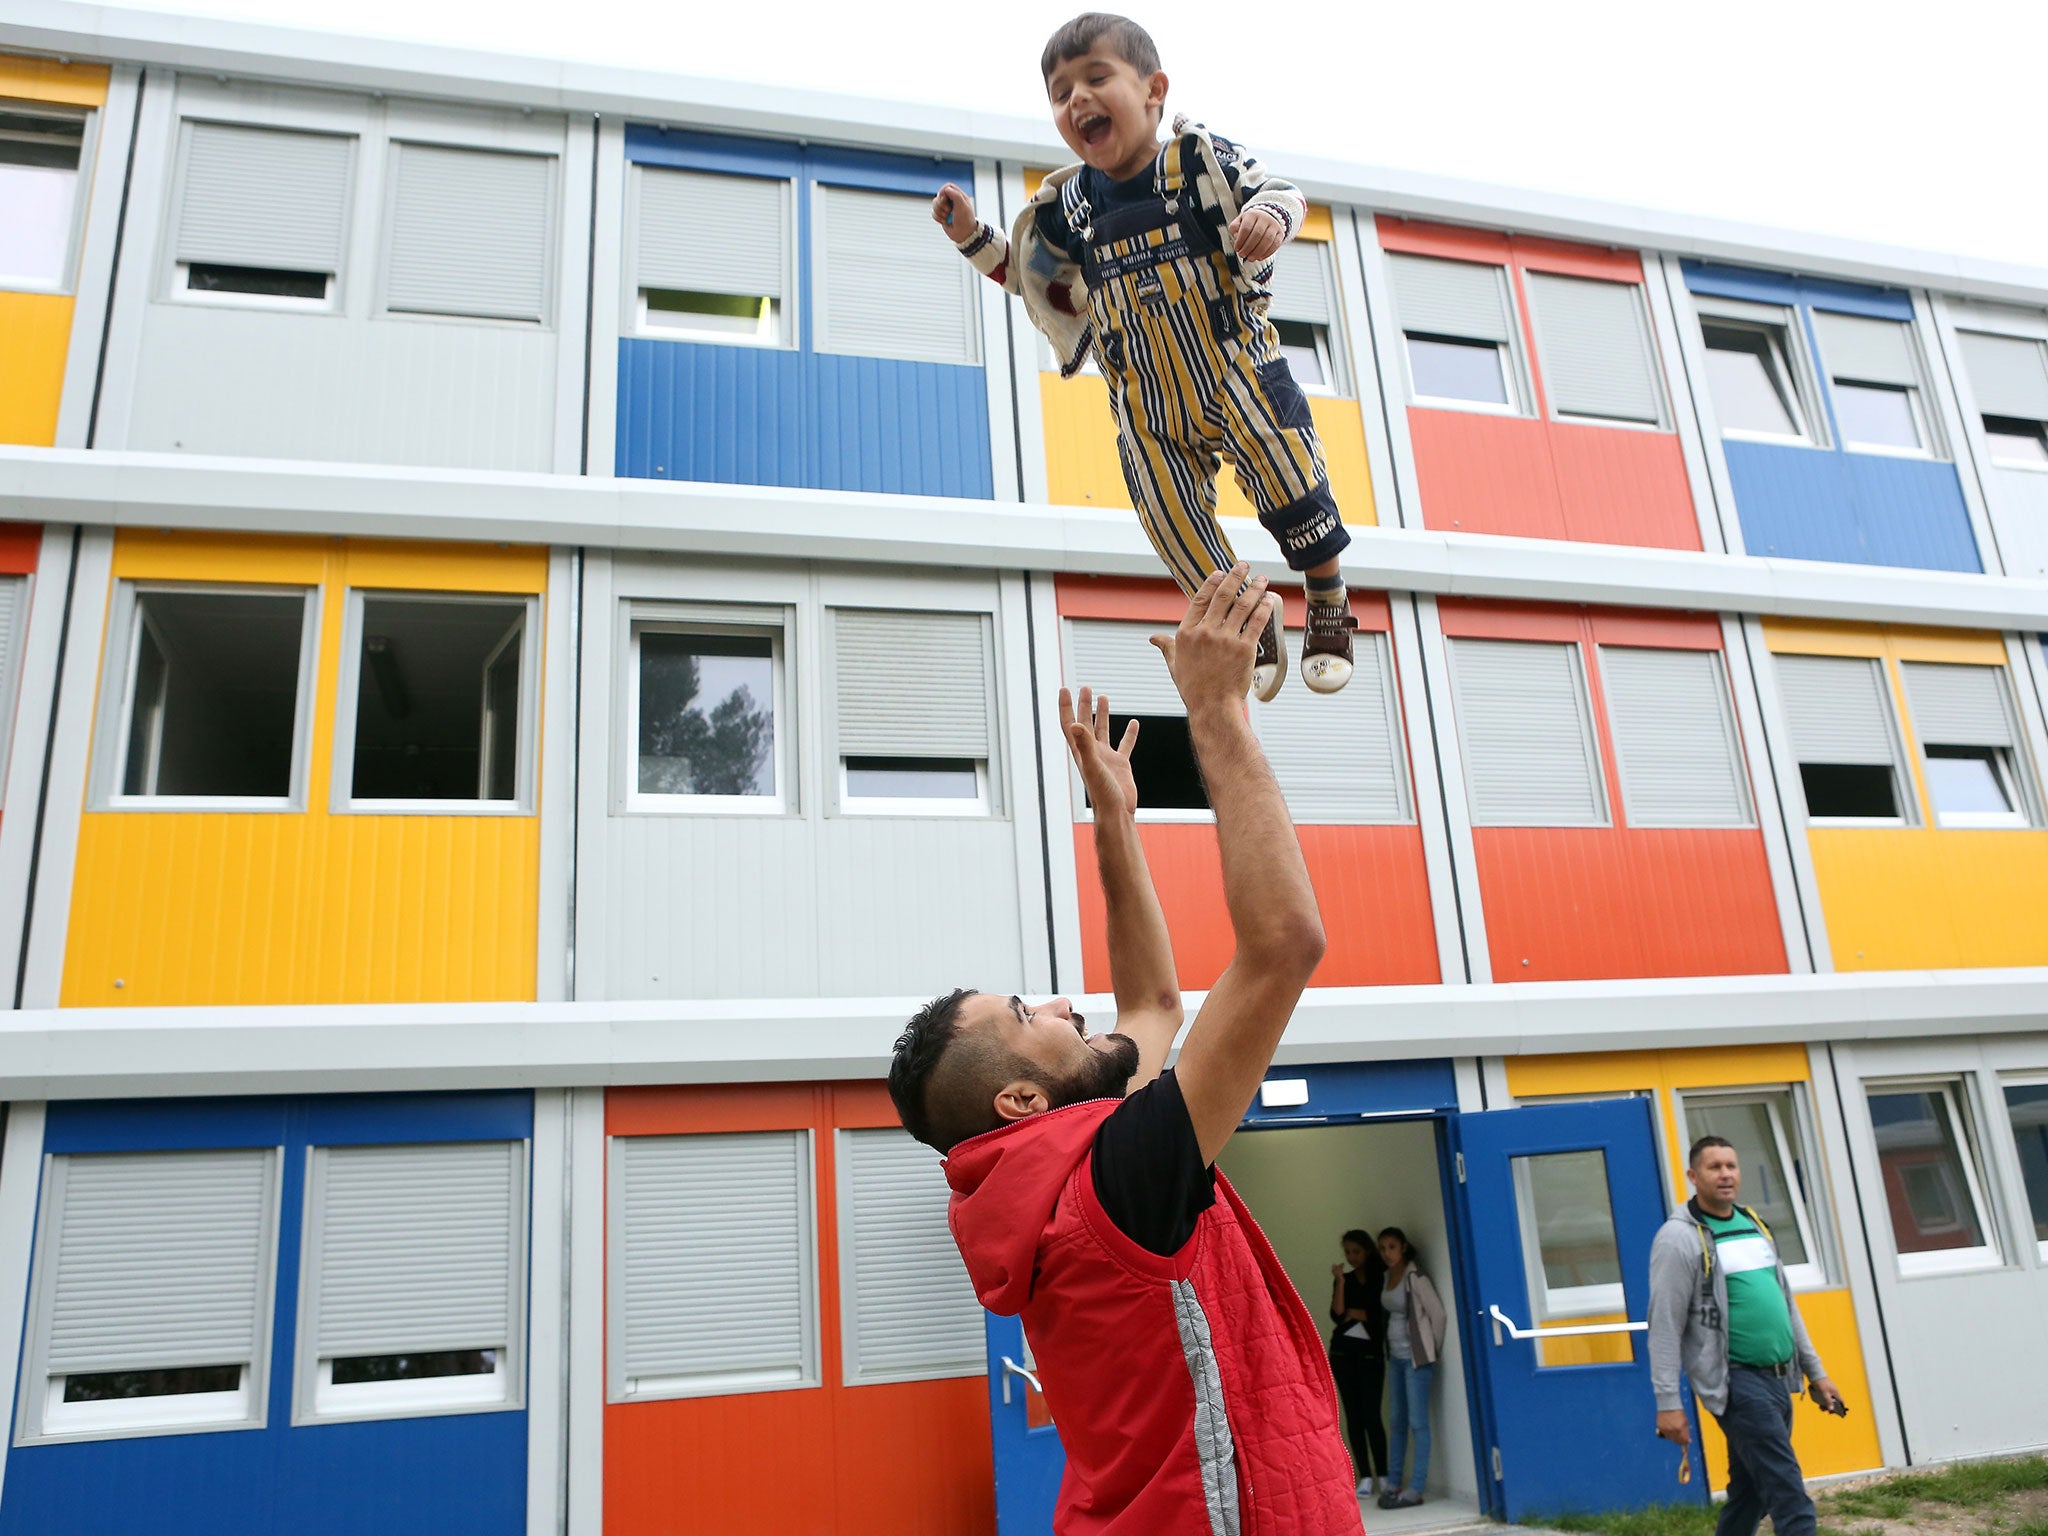 A Syrian refugee plays with his child at a temporary shelter made from shipping containers in Berlin